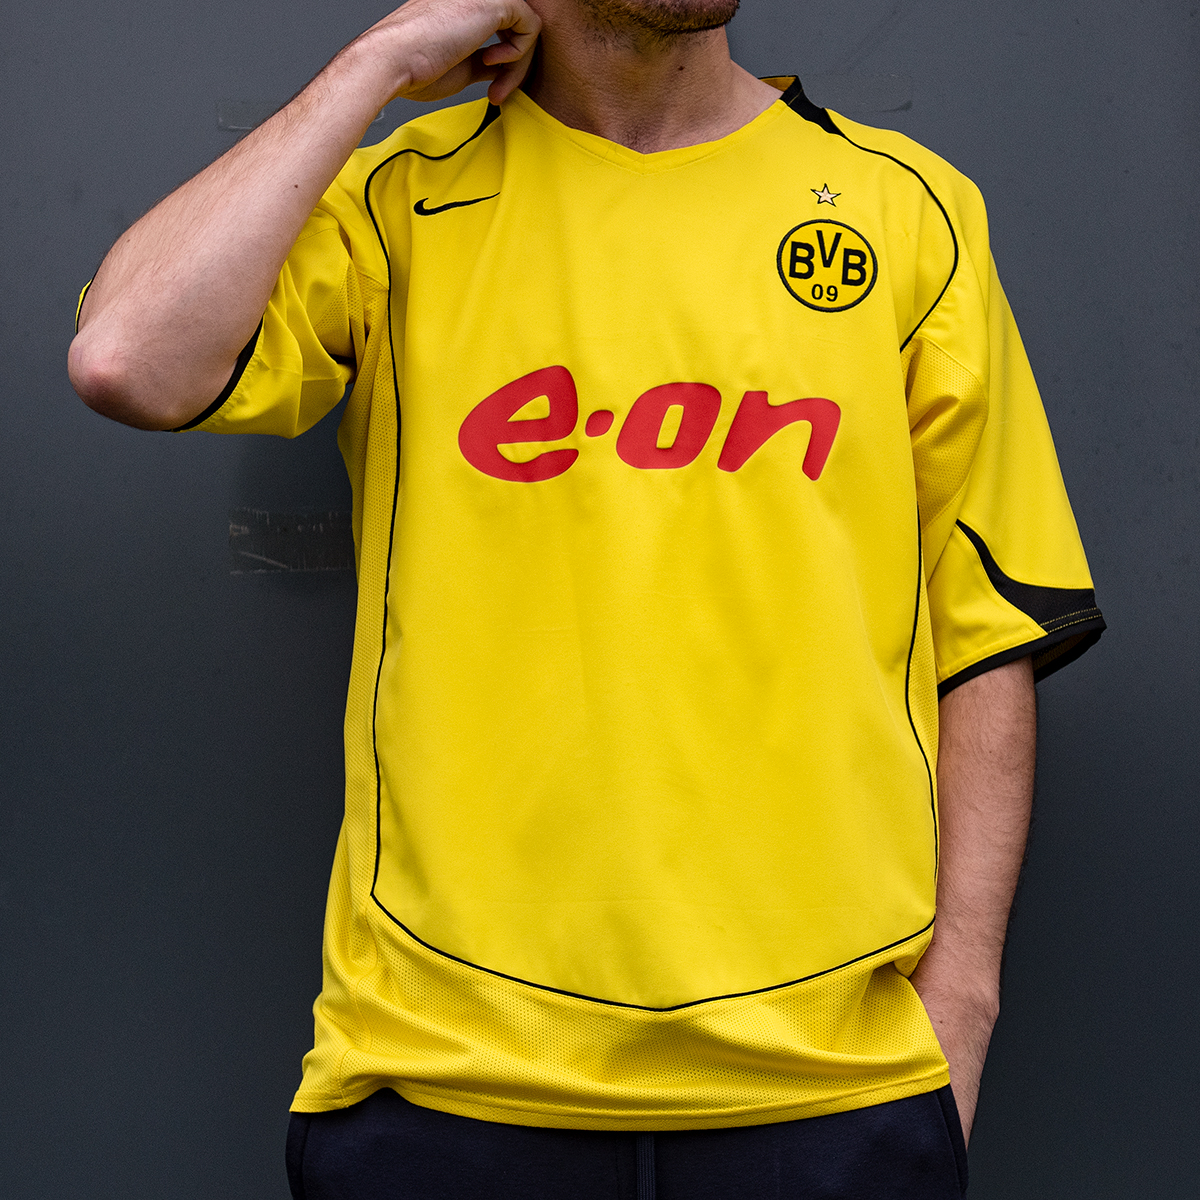 Classic Football Shirts on Twitter: "Borussia Dortmund 2004 Home by Nike 🇩🇪 BVB version of the famous Total 90 template. on the site! https://t.co/g930qWMMRi" / Twitter